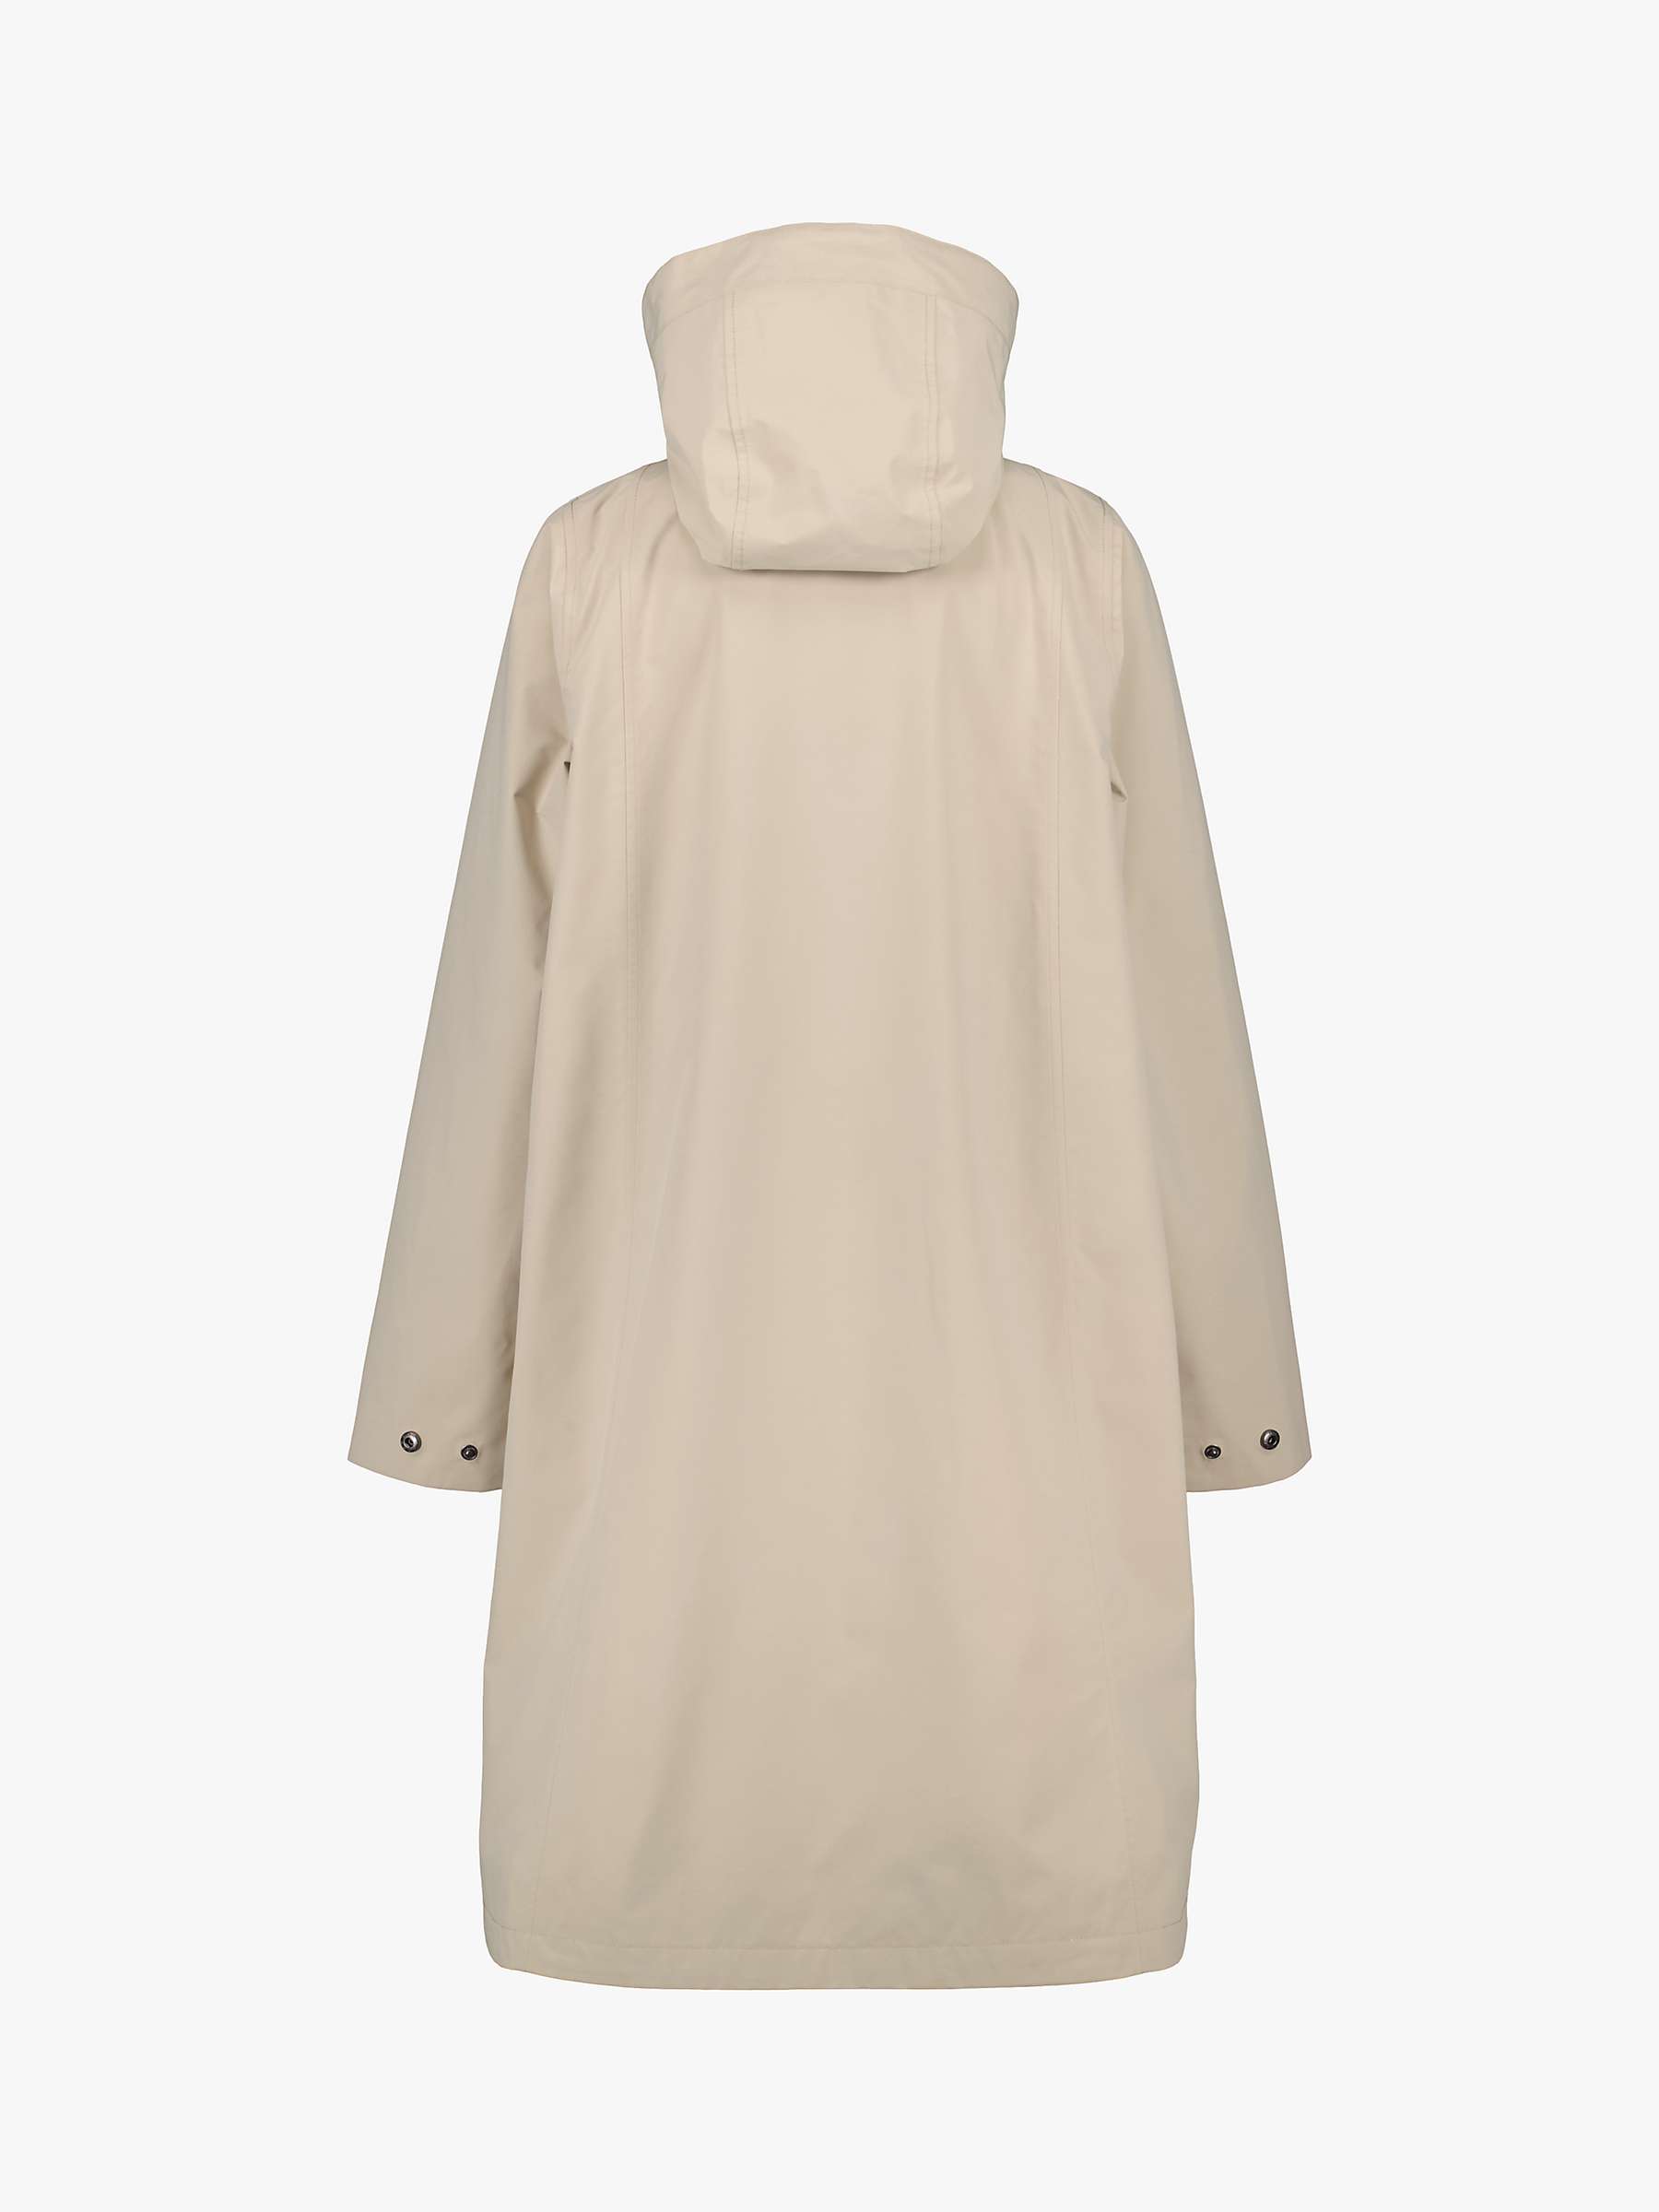 Buy Didriksons Adria Mid Length Parka Jacket Online at johnlewis.com